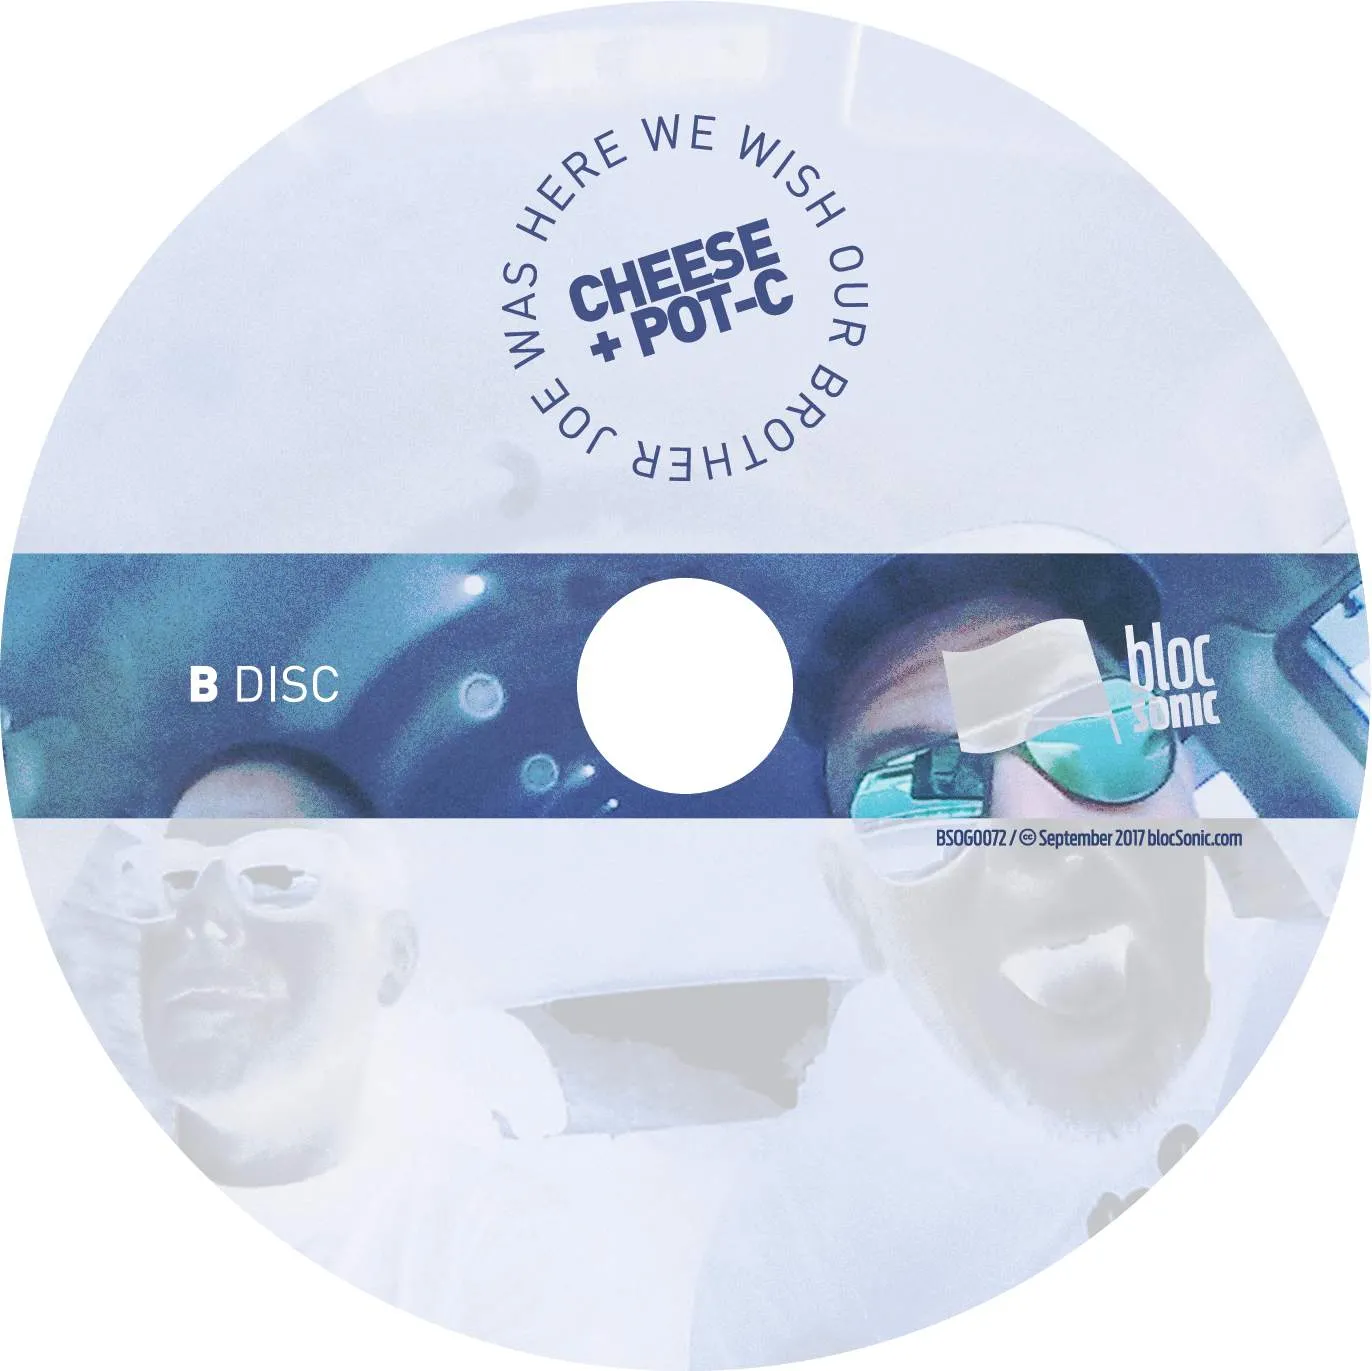 Album disc for “We Wish Our Brother Joe Was Here” by Cheese N Pot-C